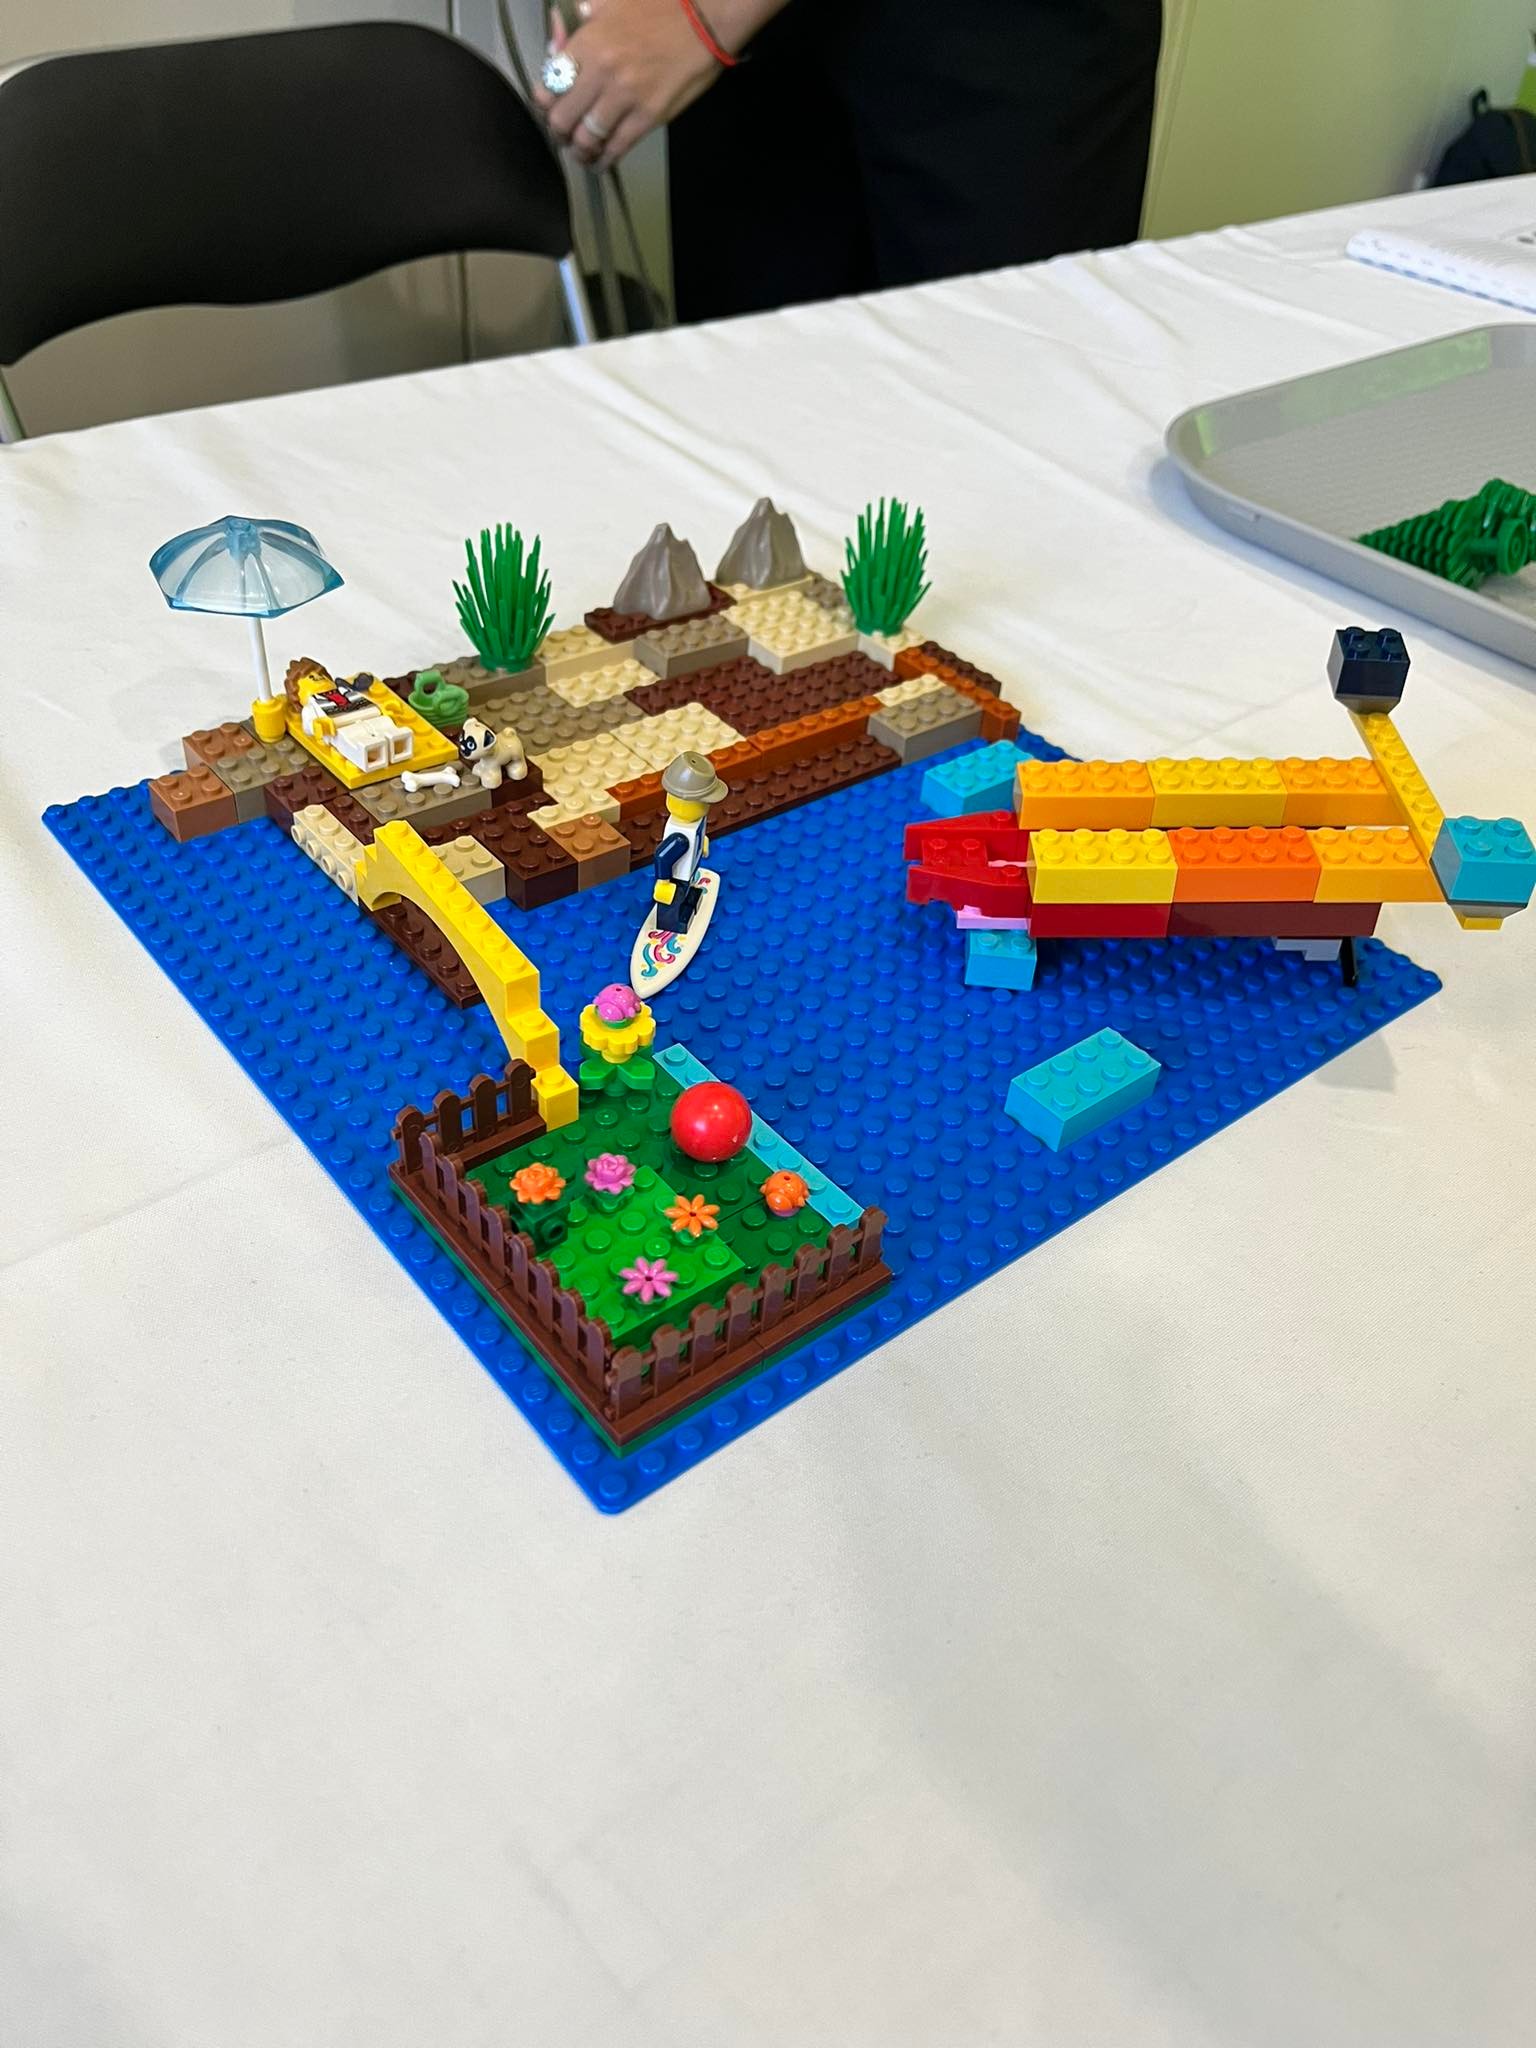 The-Brick-by-Brick-programme-in-athens-seminario-lego-based-therapy